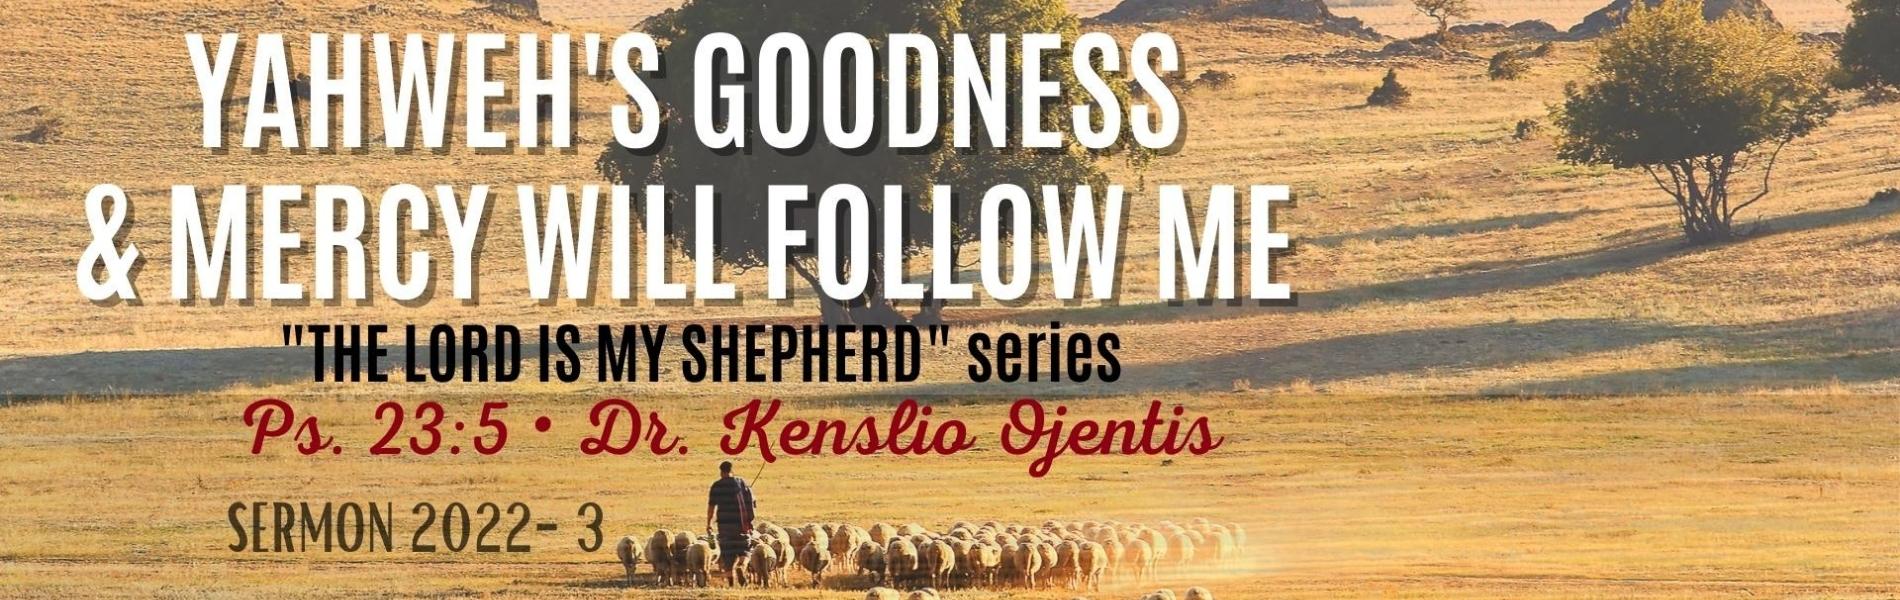 Yahweh’s Goodness and Mercy will follow me